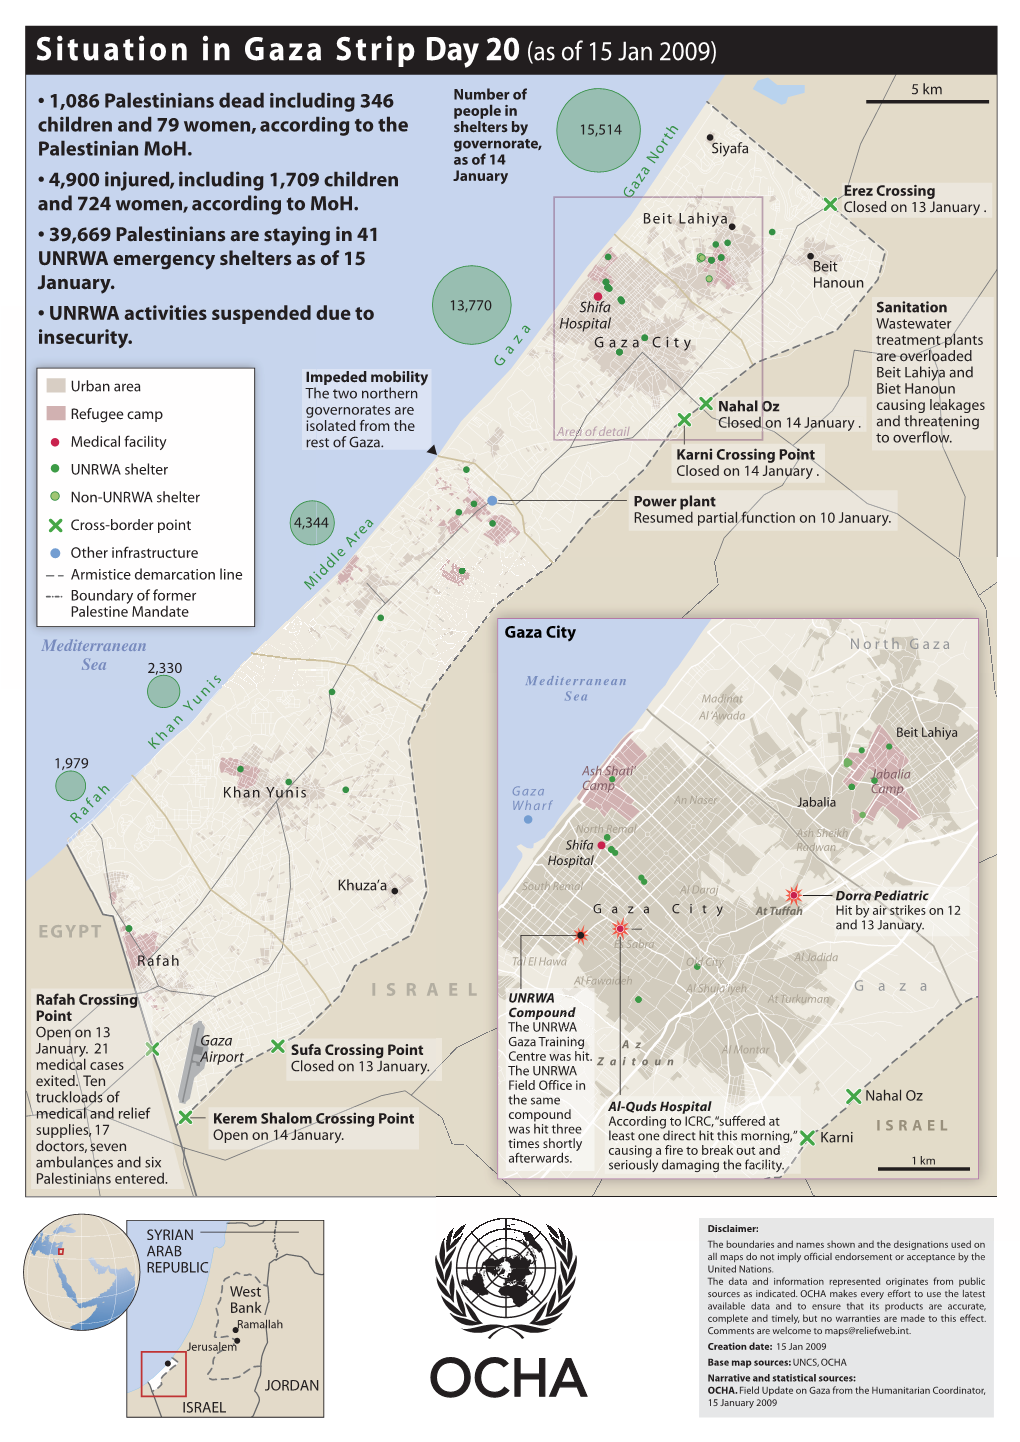 Situation in Gaza Strip Day 20 (As of 15 Jan 2009)